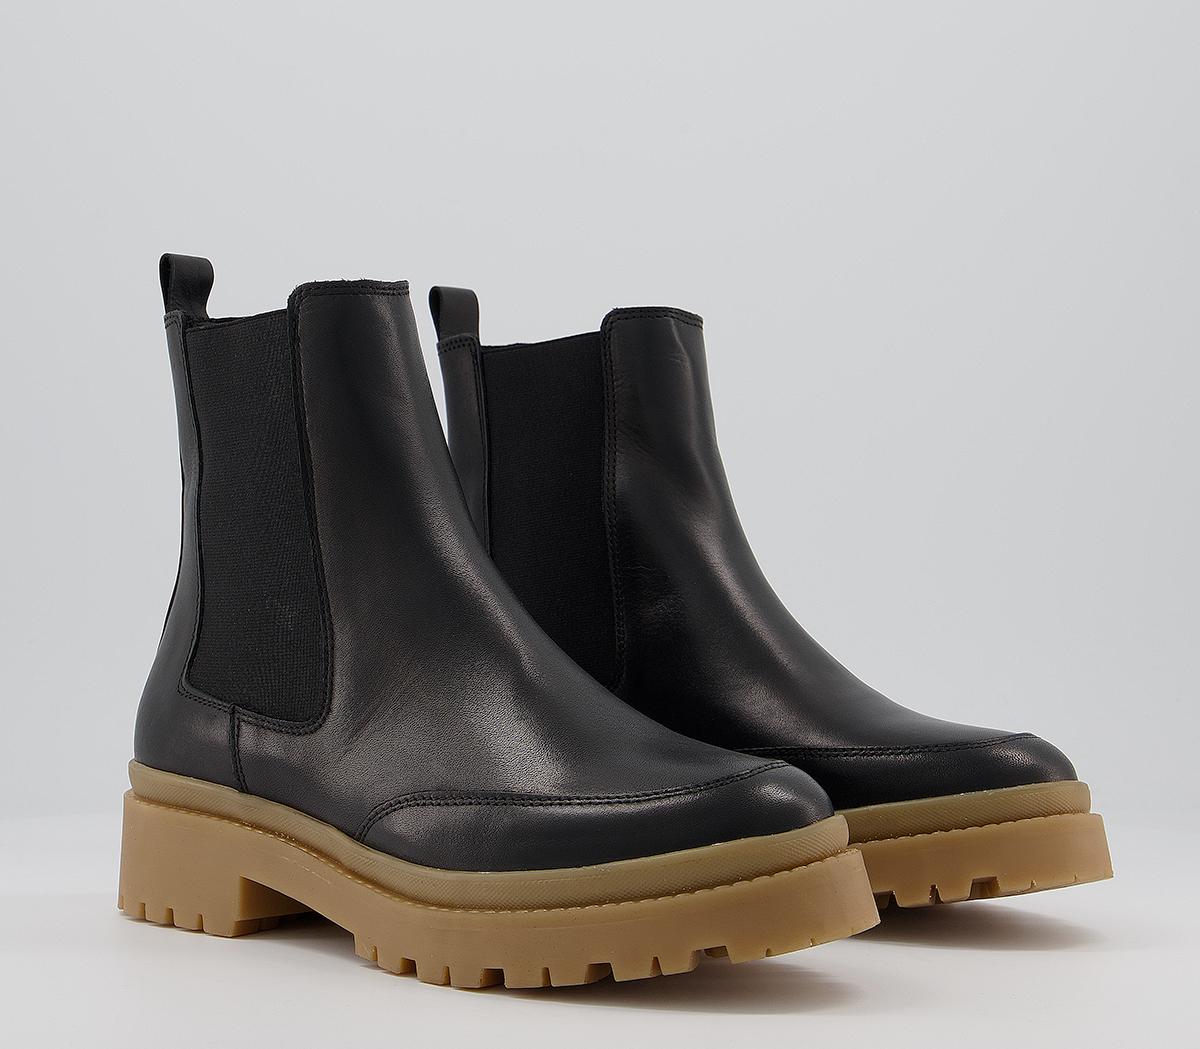 Office Amuse Contrast Sole Chelsea Boots Black Leather With Brown Sole ...